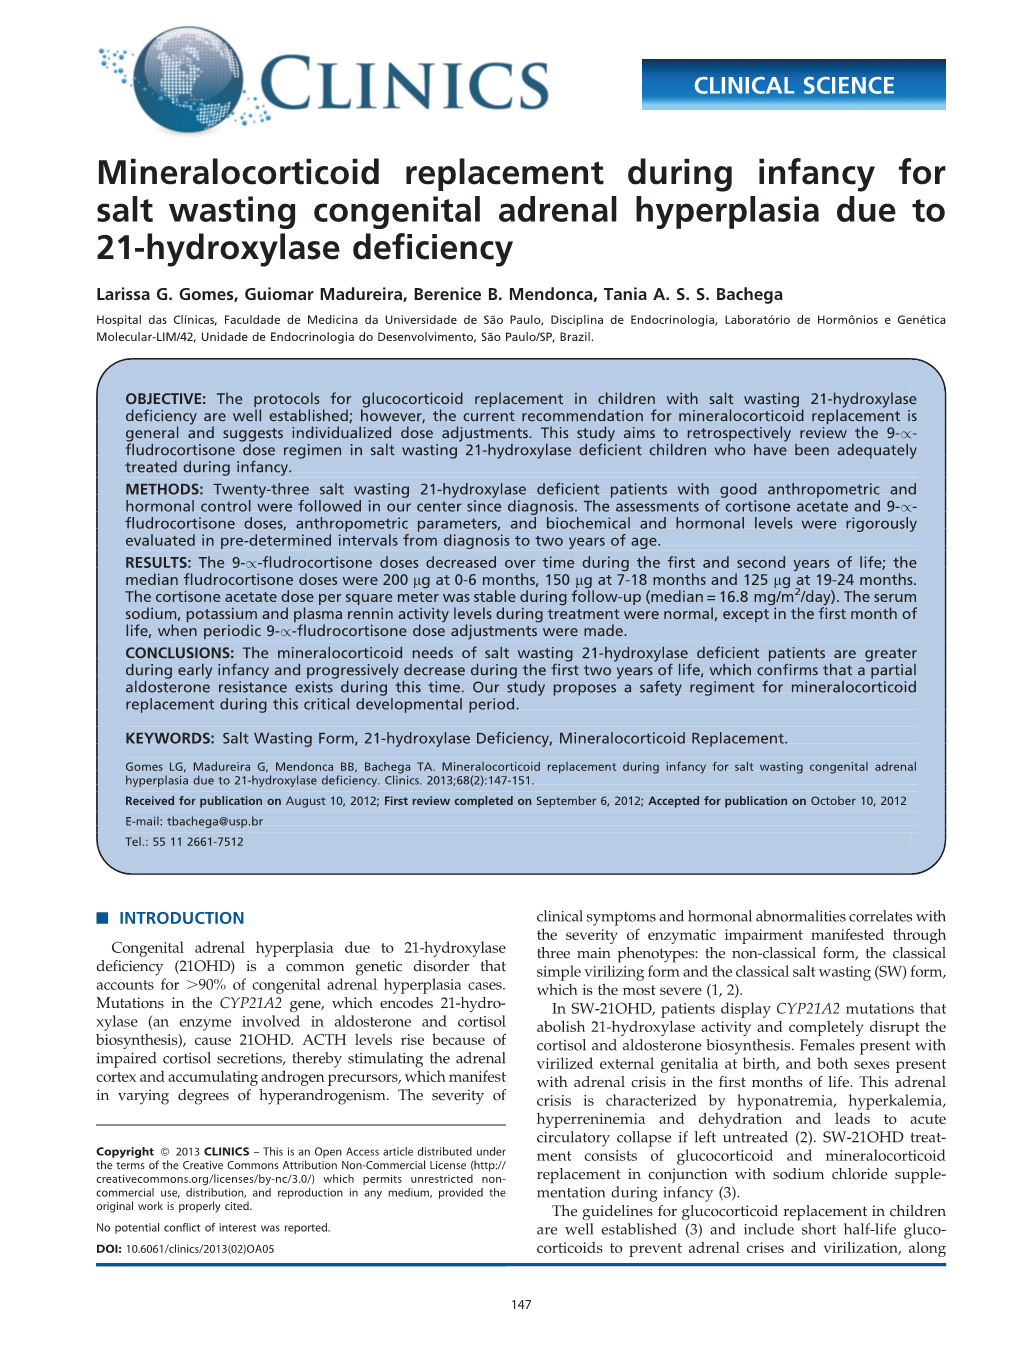 Mineralocorticoid Replacement During Infancy for Salt Wasting Congenital Adrenal Hyperplasia Due to 21-Hydroxylase Deficiency